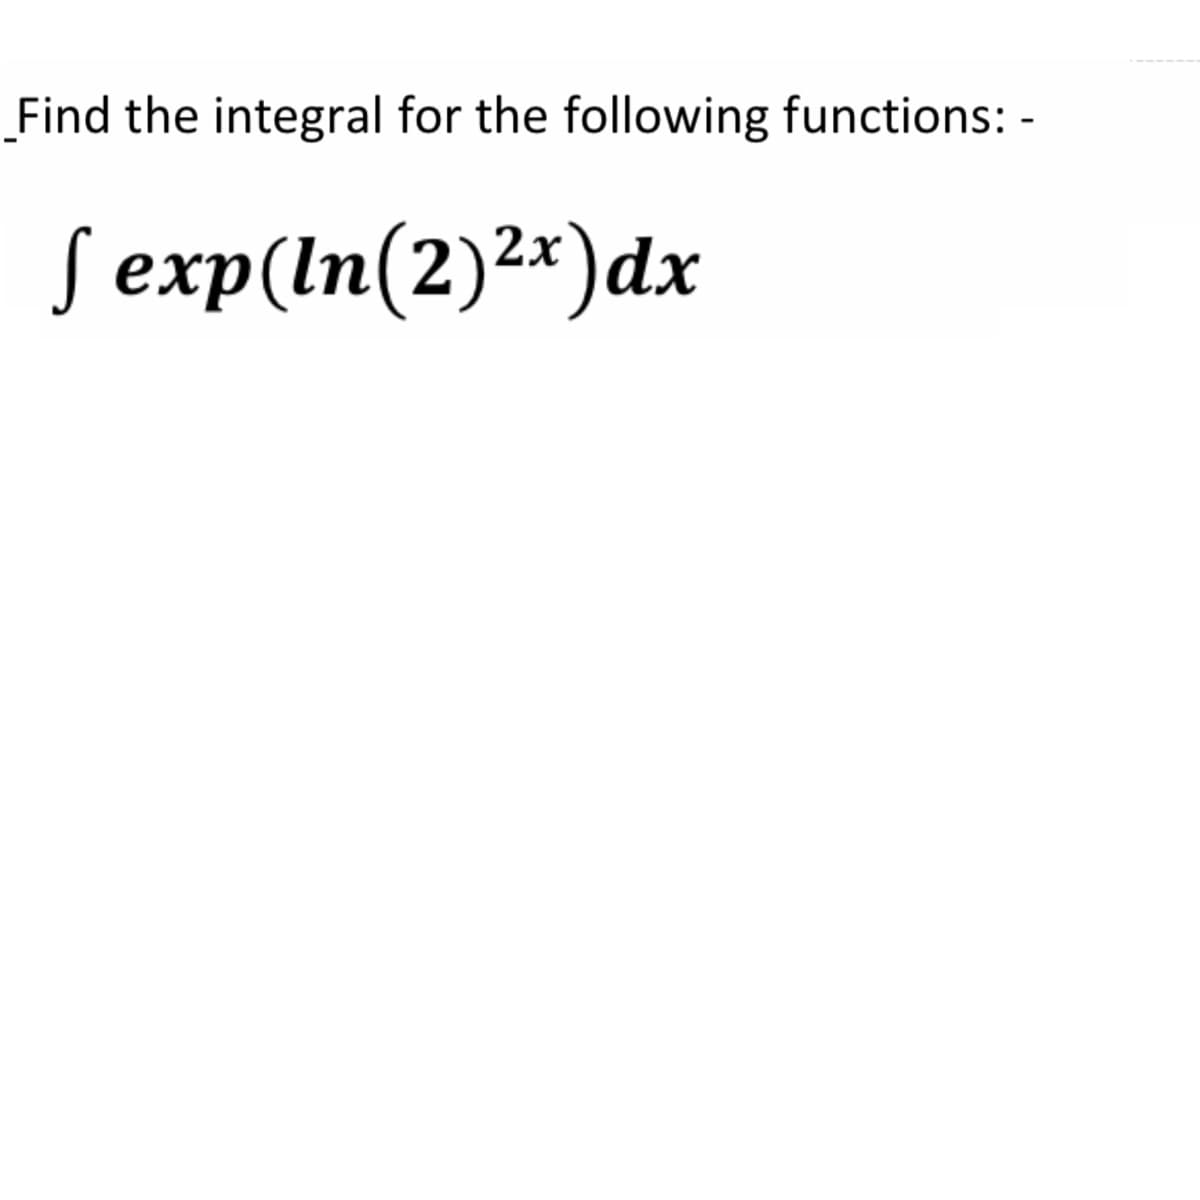 Find the integral for the following functions: -
Sexp(ln(2)2*)dx
